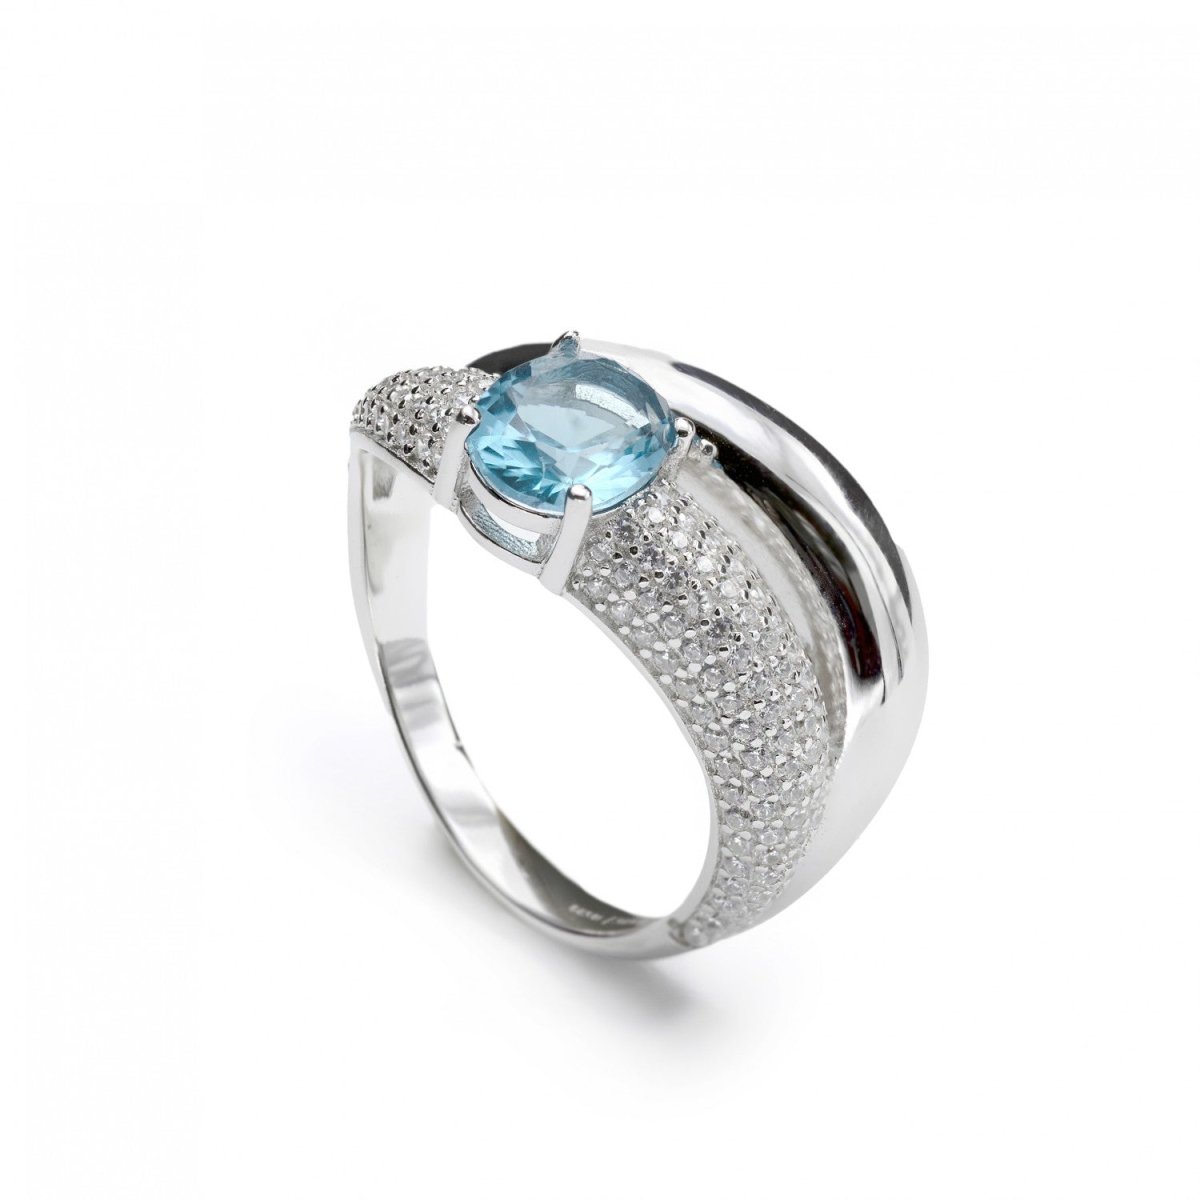 Ring - Curved design rings with gemstone in aquamarine tone